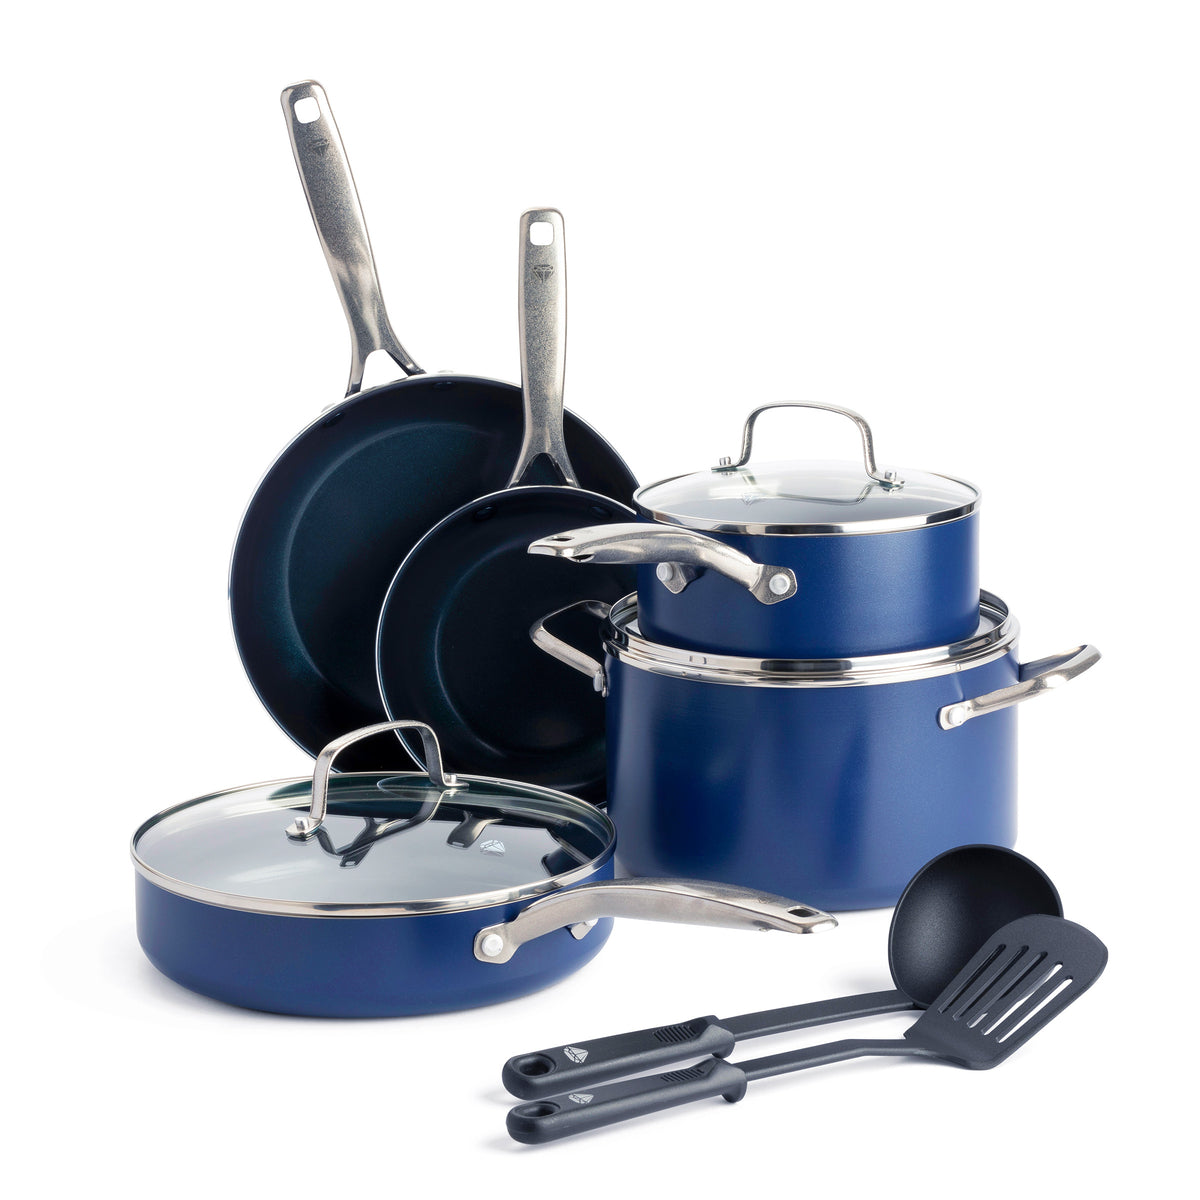 CLASSIC INDUCTION 10-Piece Cookware Set